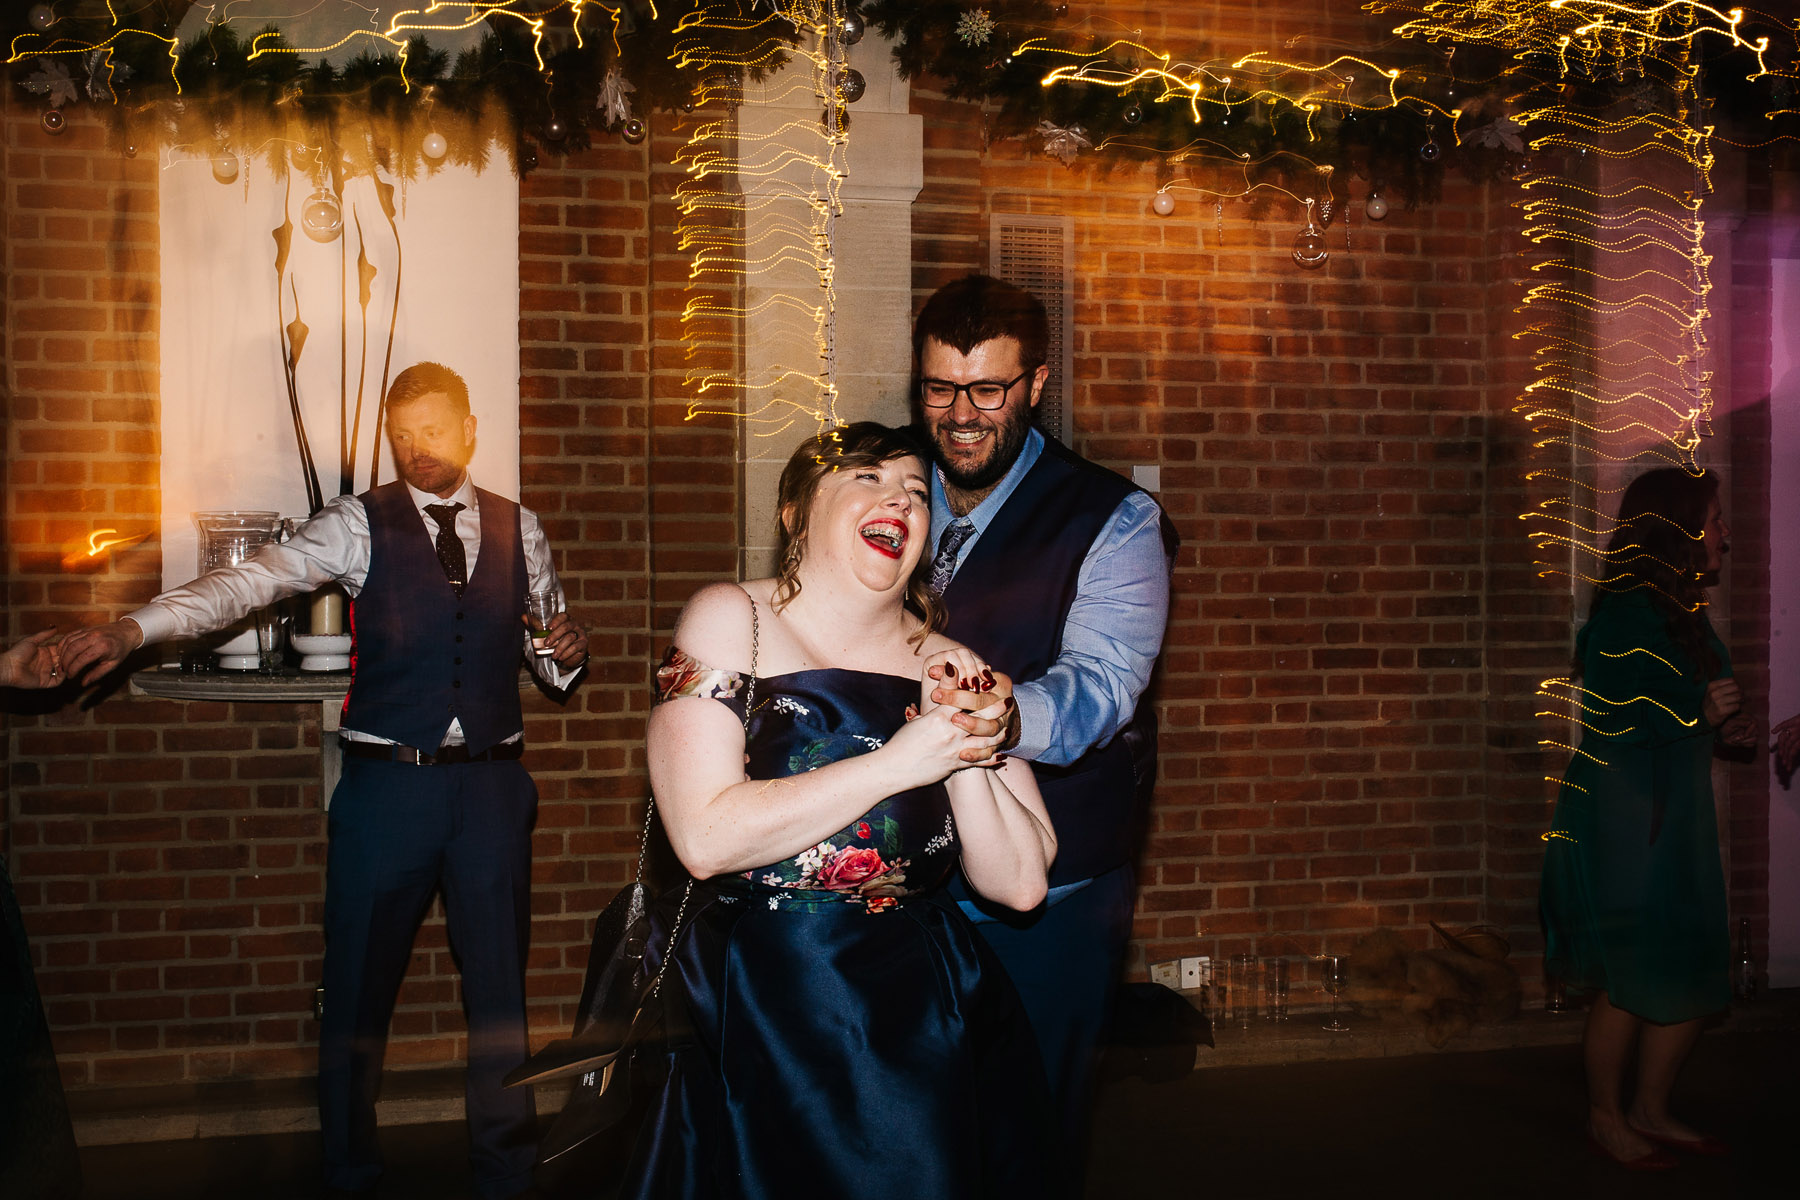 Couple dancing at a winter wedding 